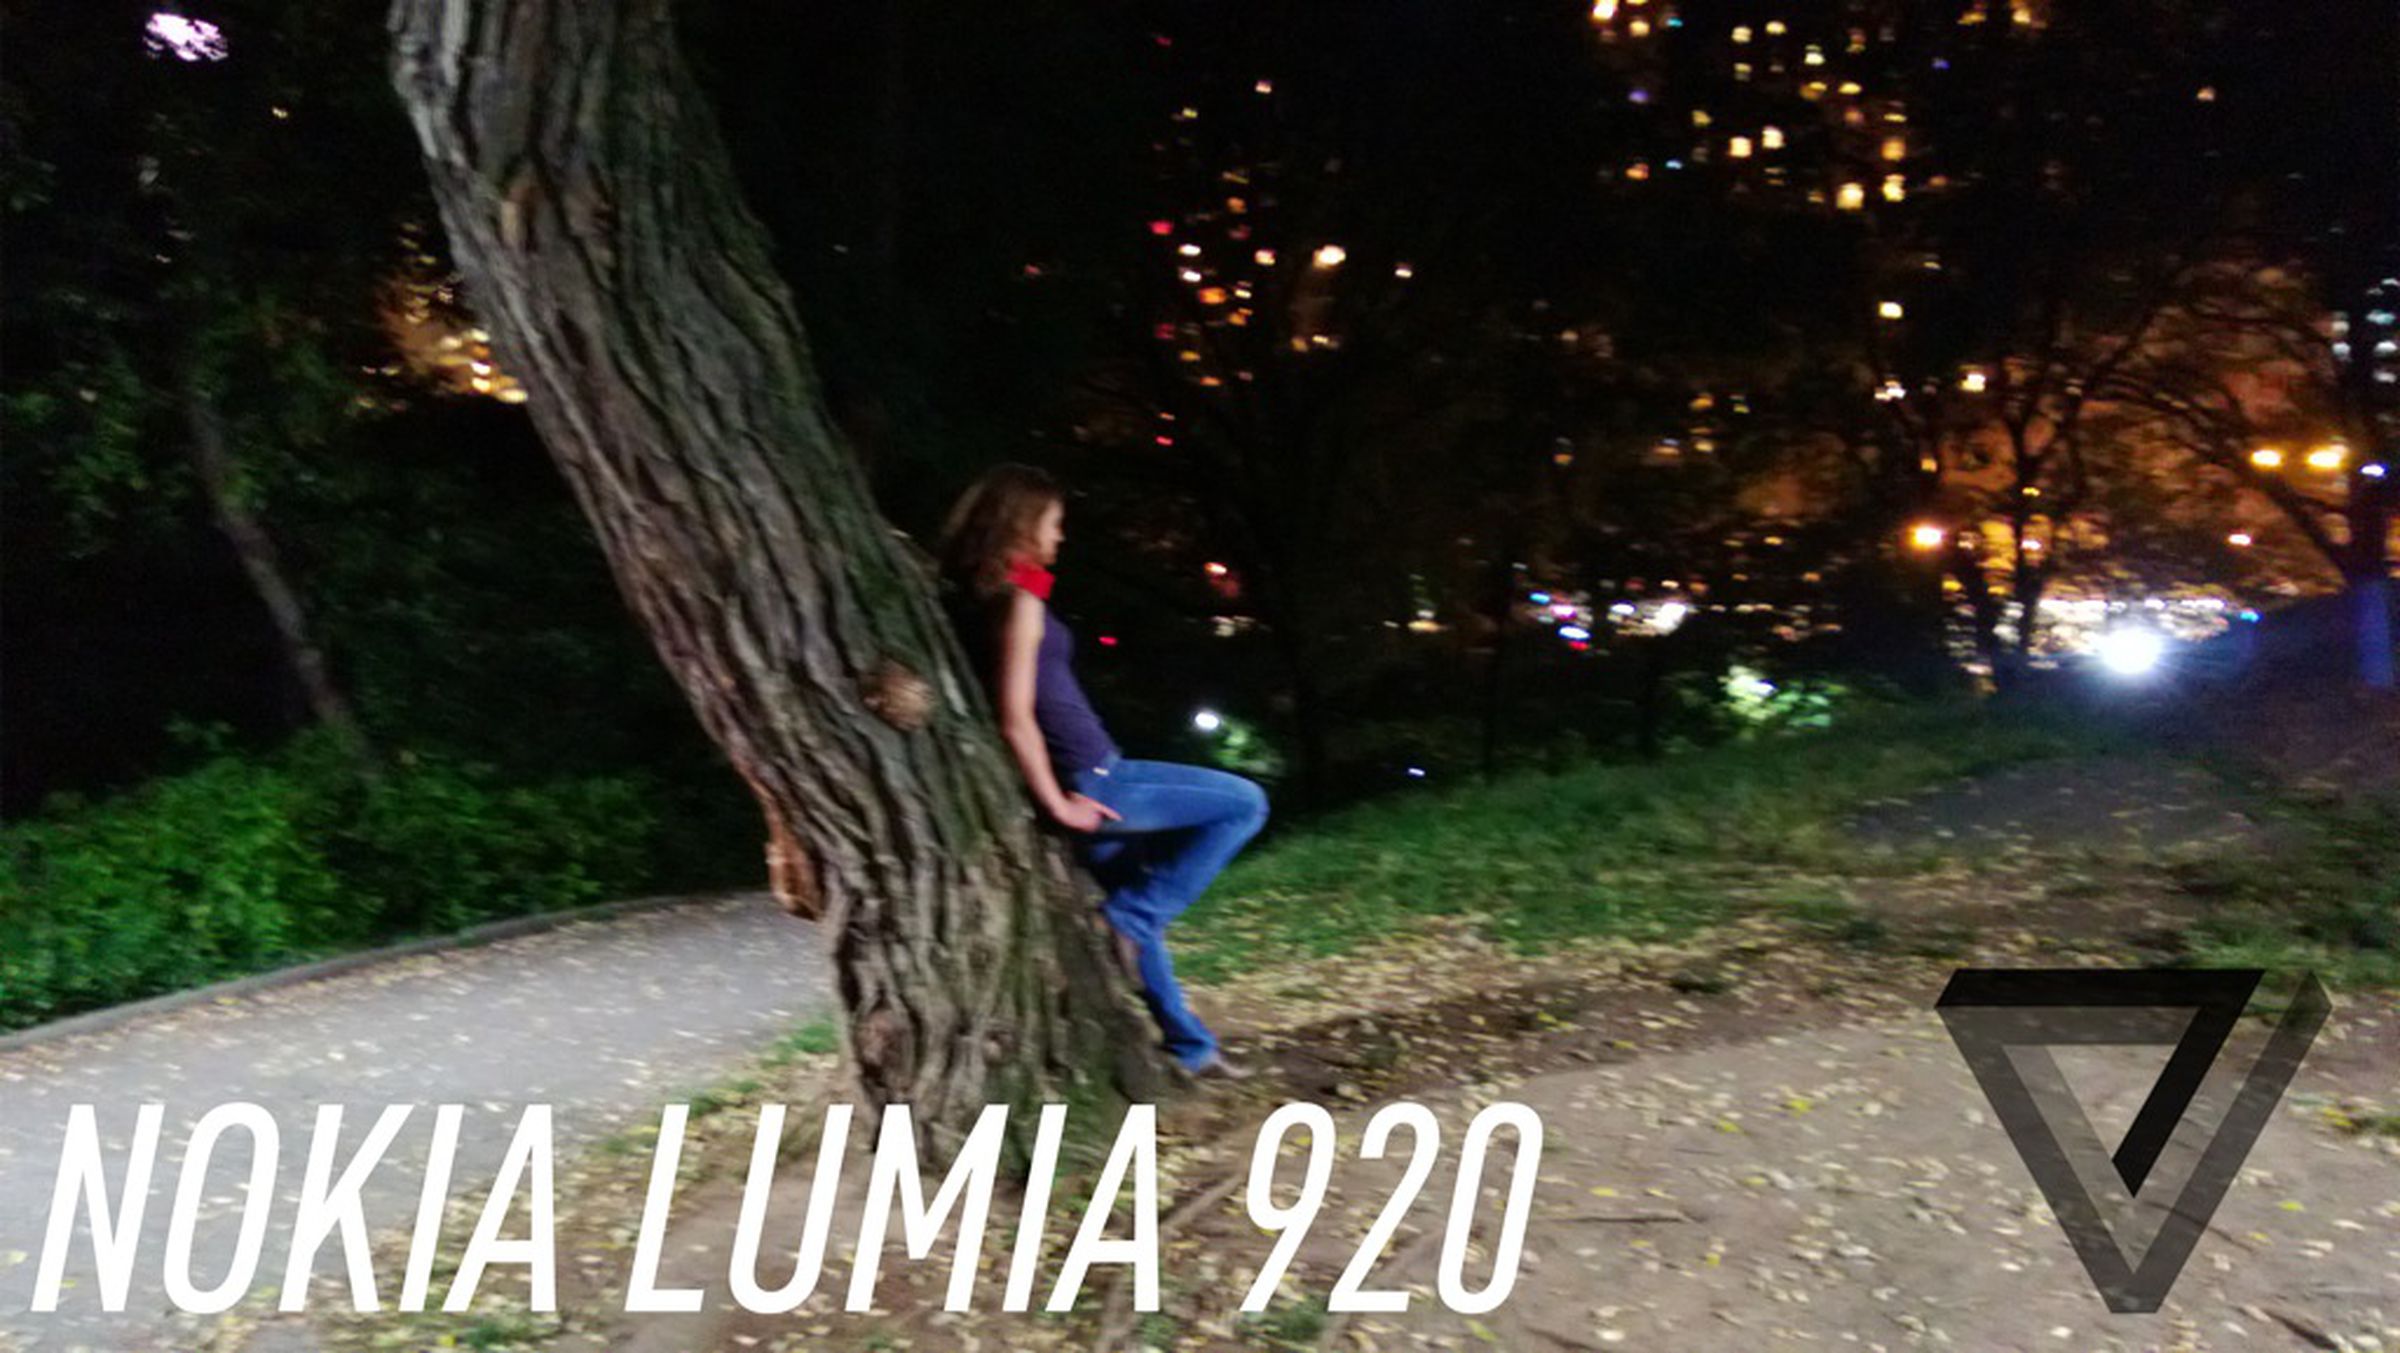 Nokia Lumia 920 low-light sample images vs the competition